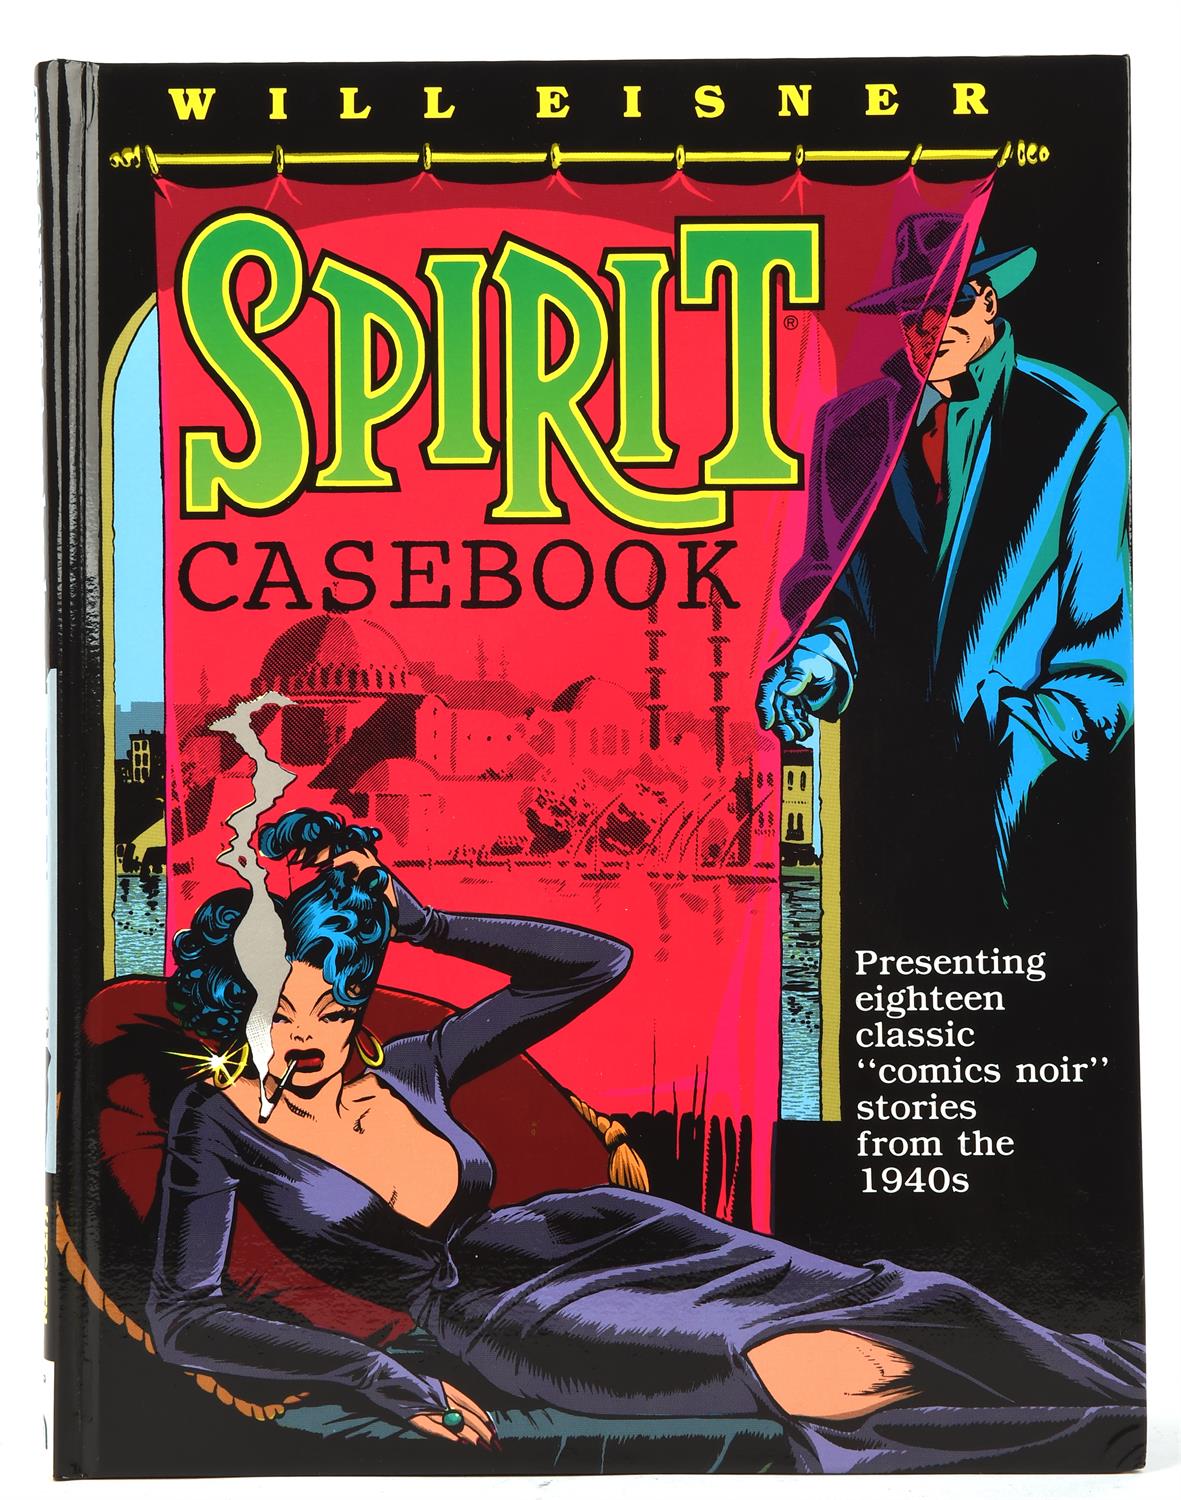 The Spirit Casebook by Will Eisner Kitchen sink Press, 1990, Signed limited Hardcover.